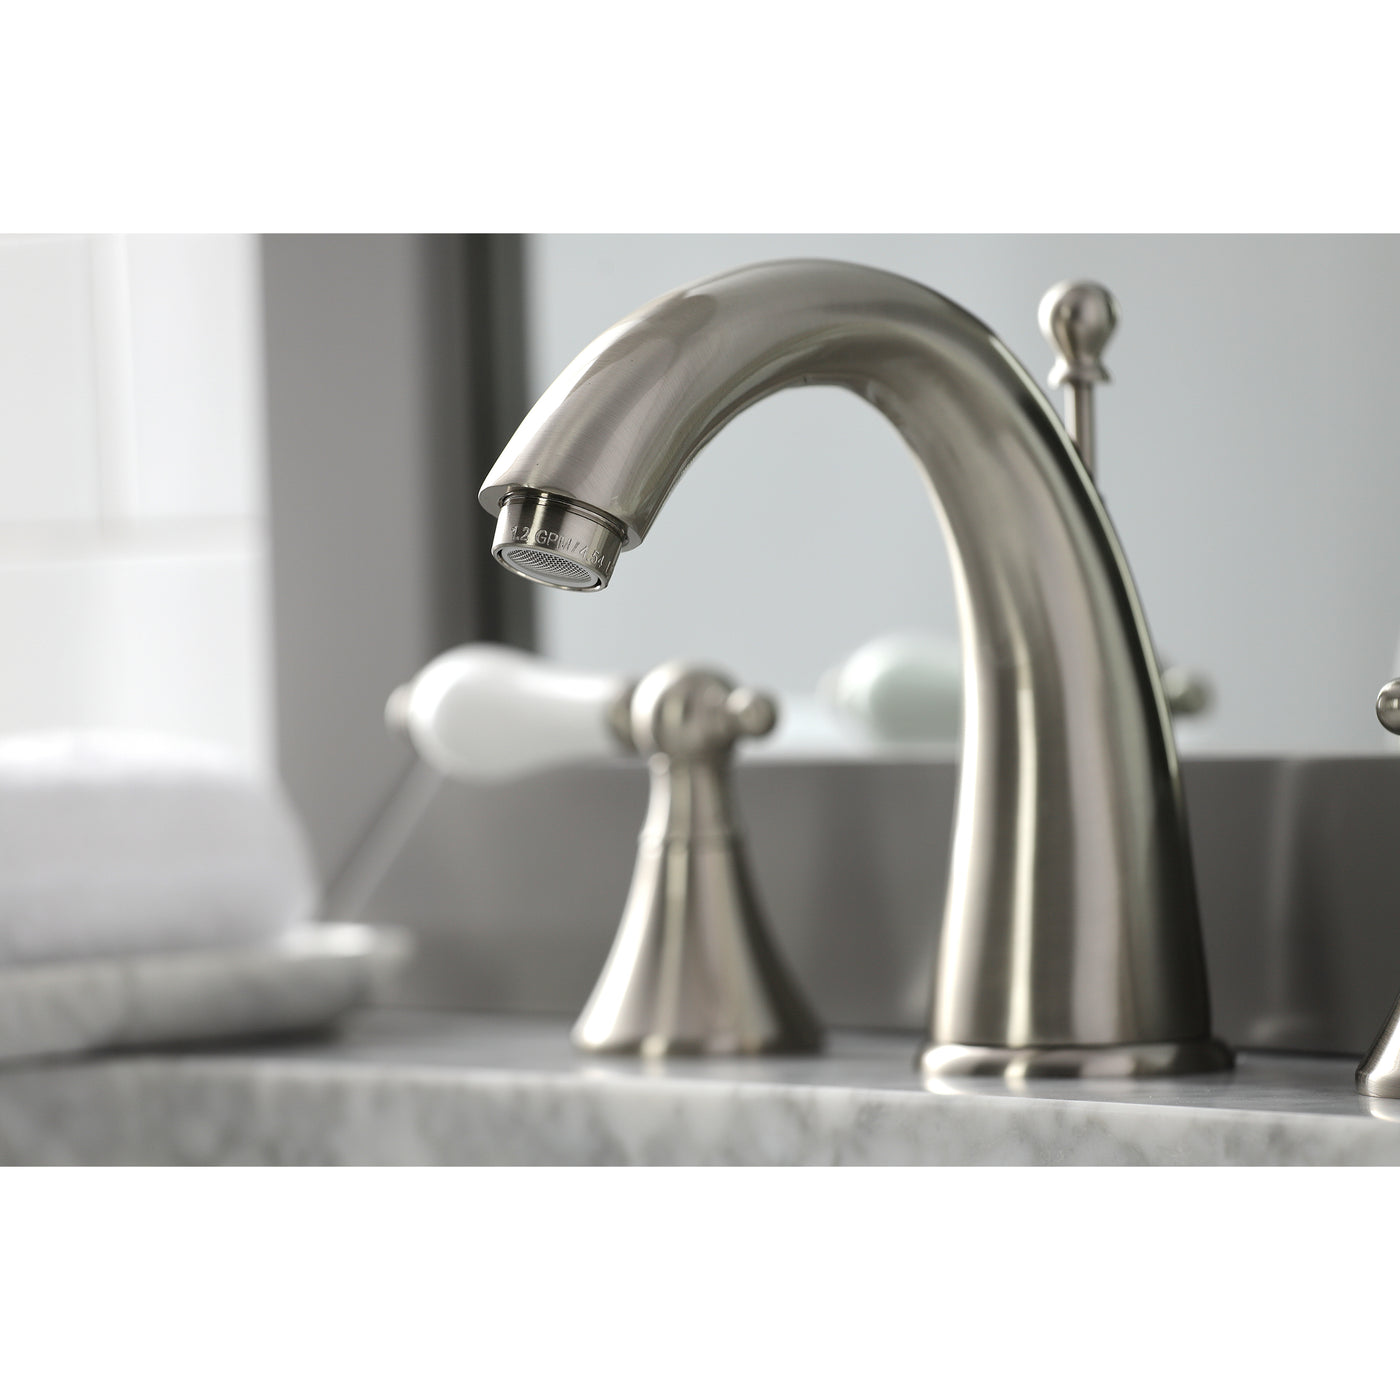 Elements of Design ES2978PL Widespread Bathroom Faucet with Brass Pop-Up, Brushed Nickel